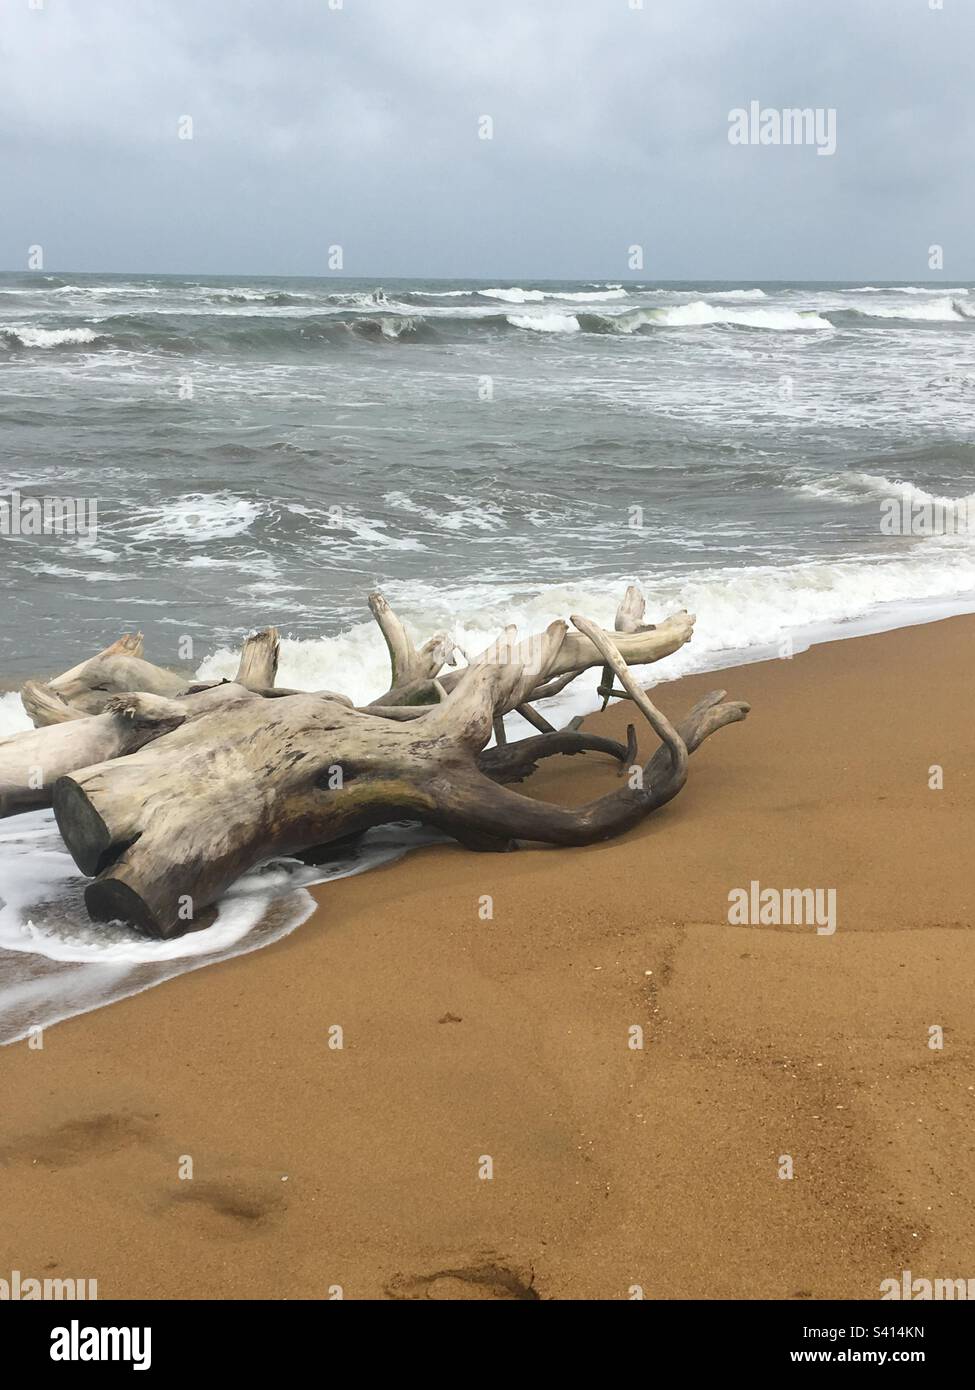 Tree trunk washed up on the beach in Sri Lanka Stock Photo